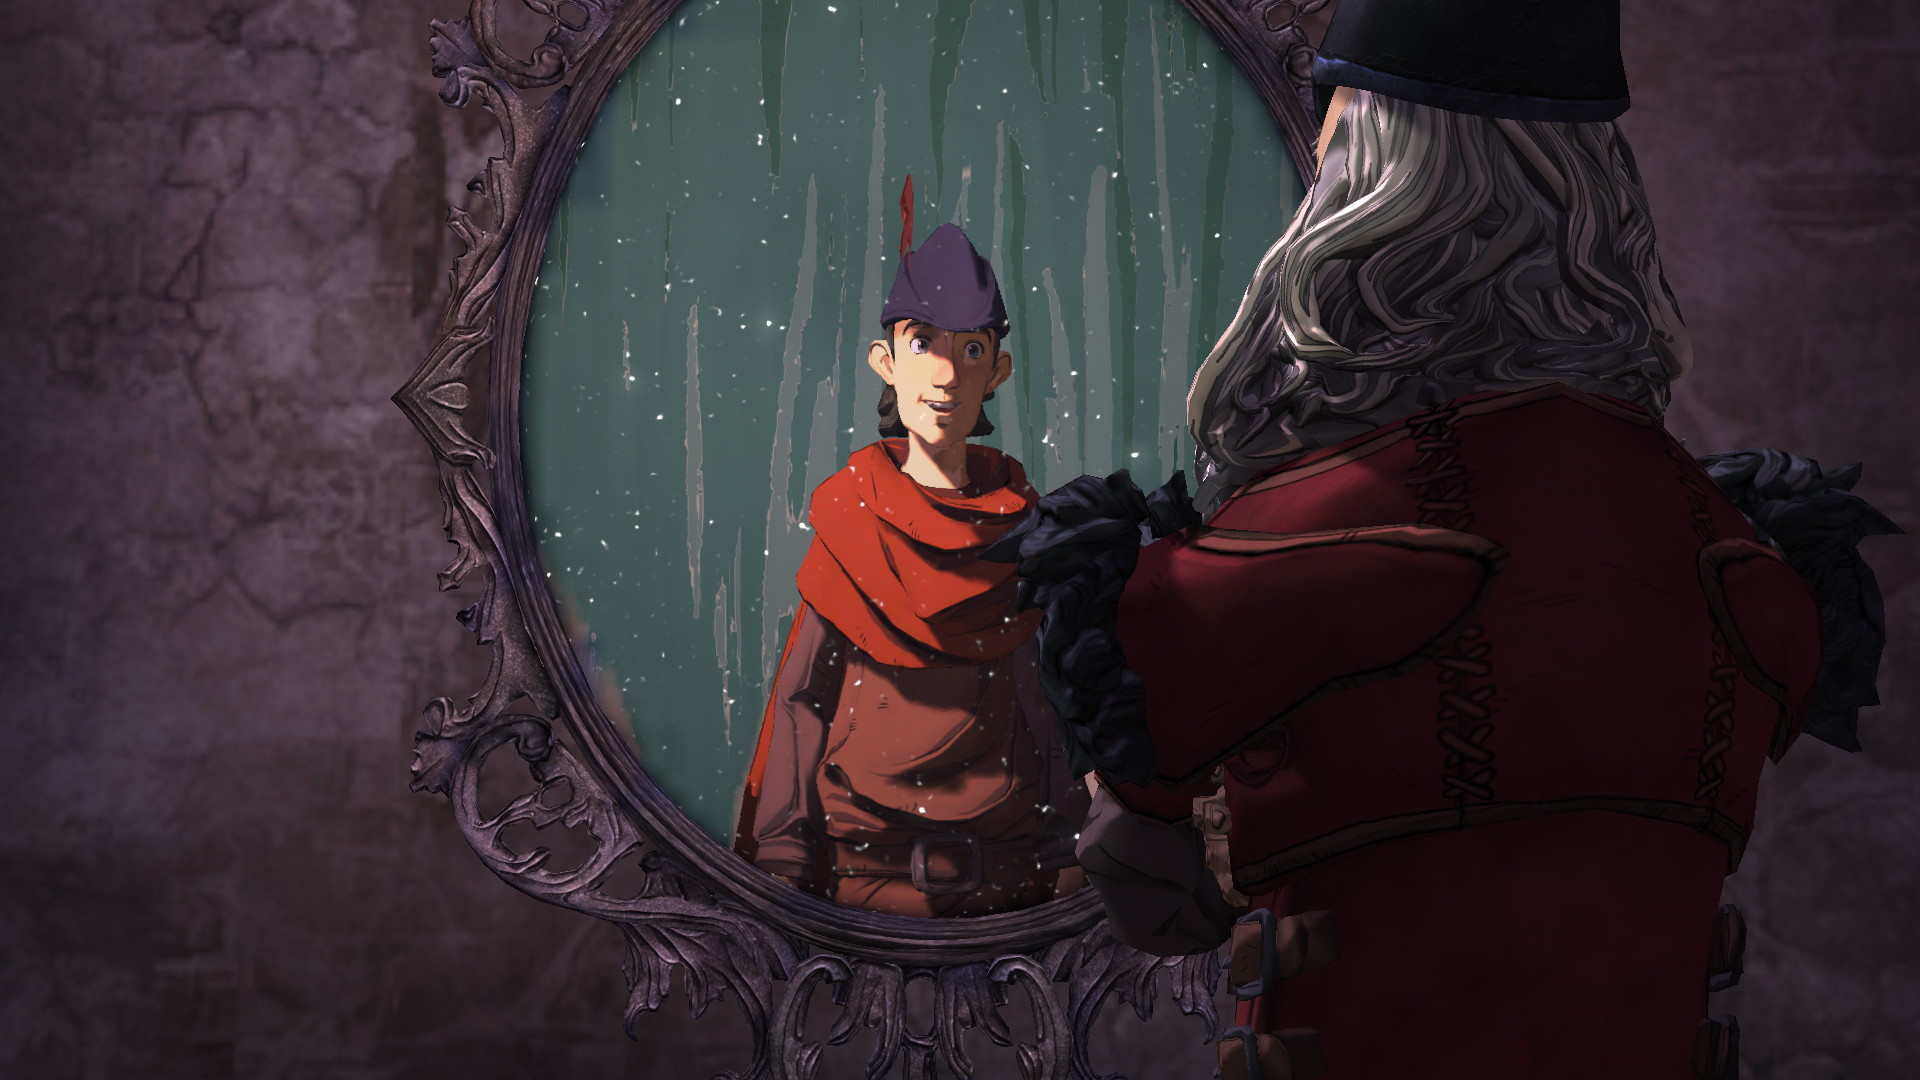 King's Quest - Chapter 5: The Good Knight - screenshot 4